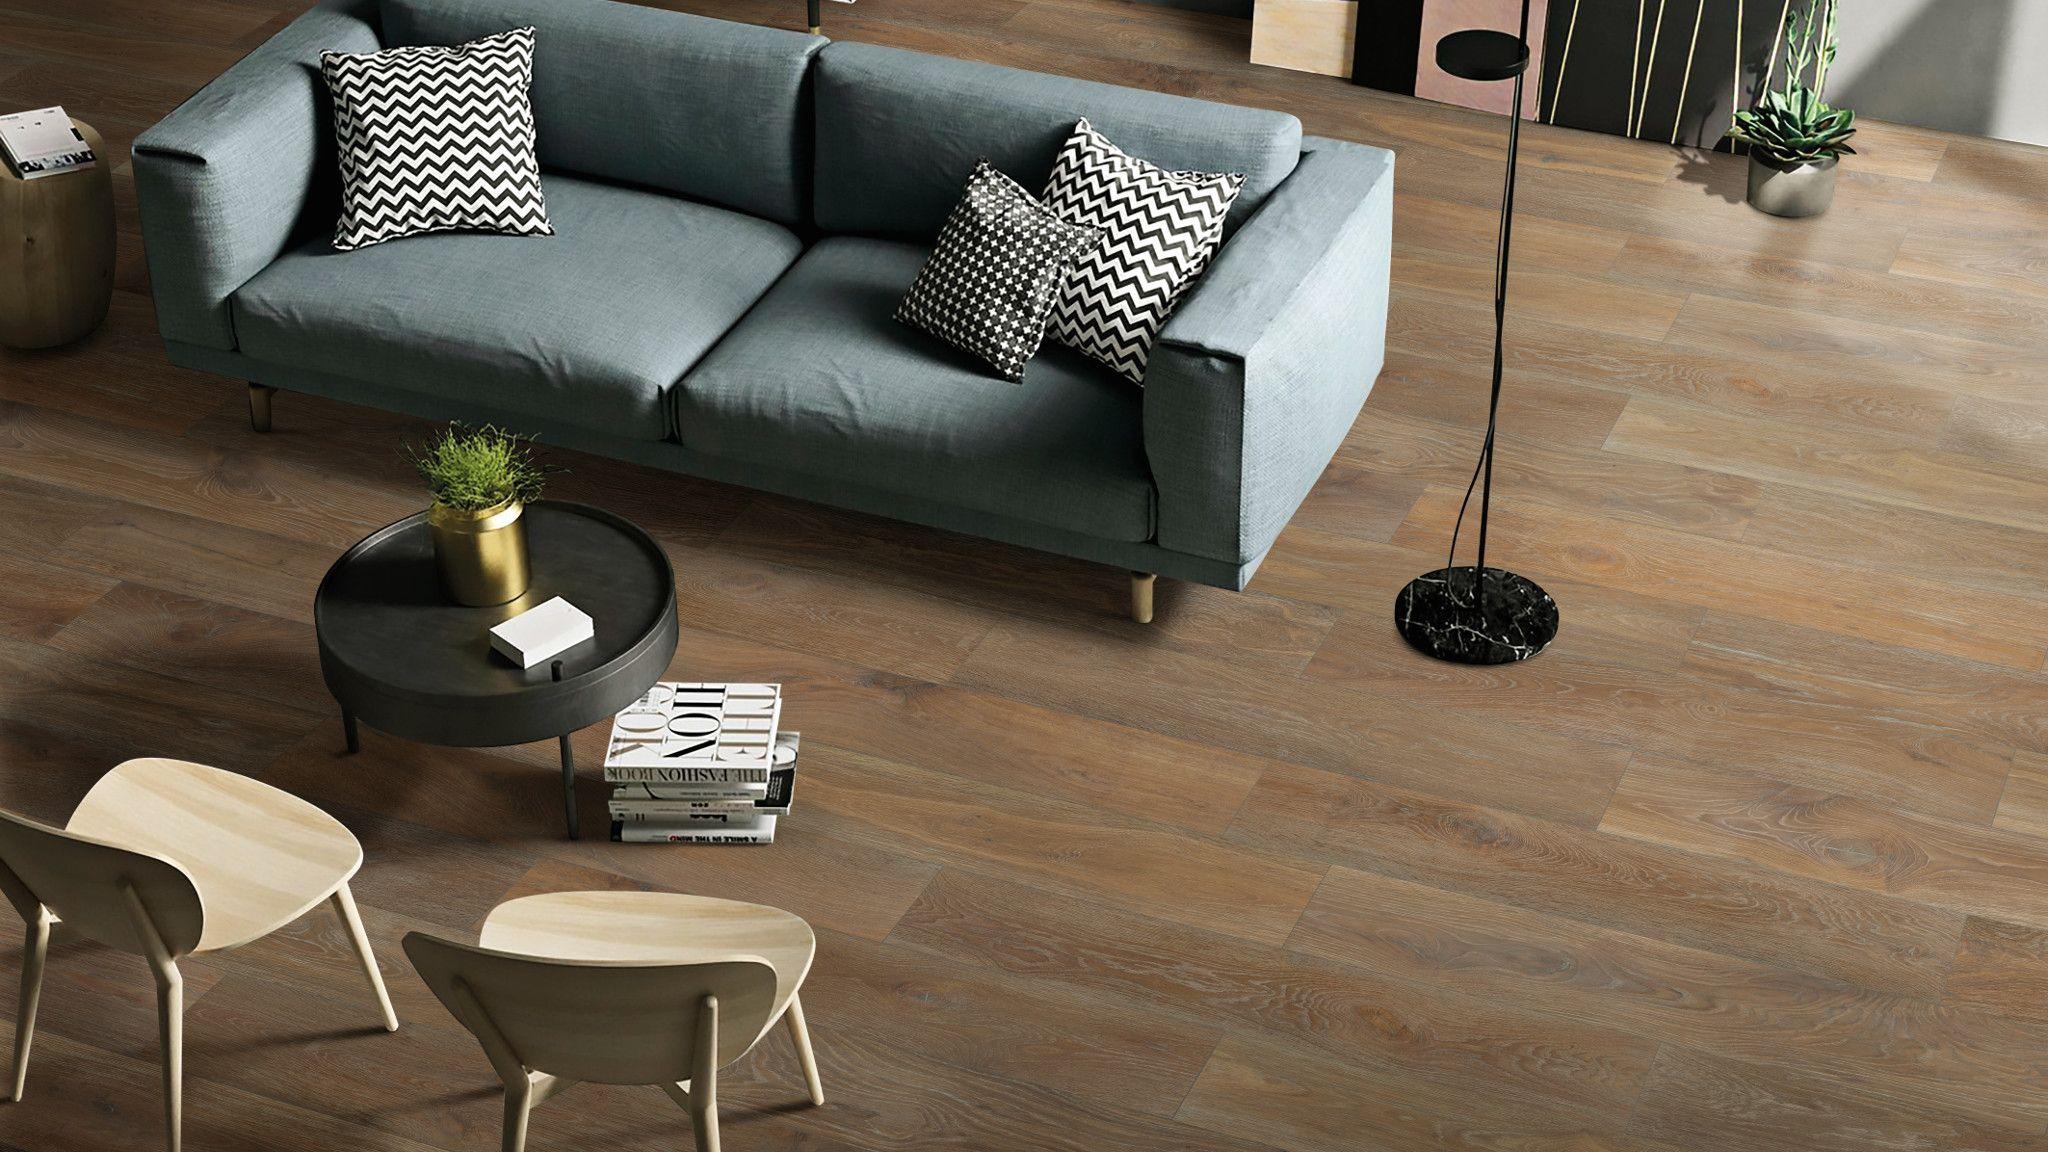 The Porta Nuova Series is a rectified color body porcelain. Inspired by the rich tones of natural wood, this series has an organic look and offers a warm, enduring appeal.